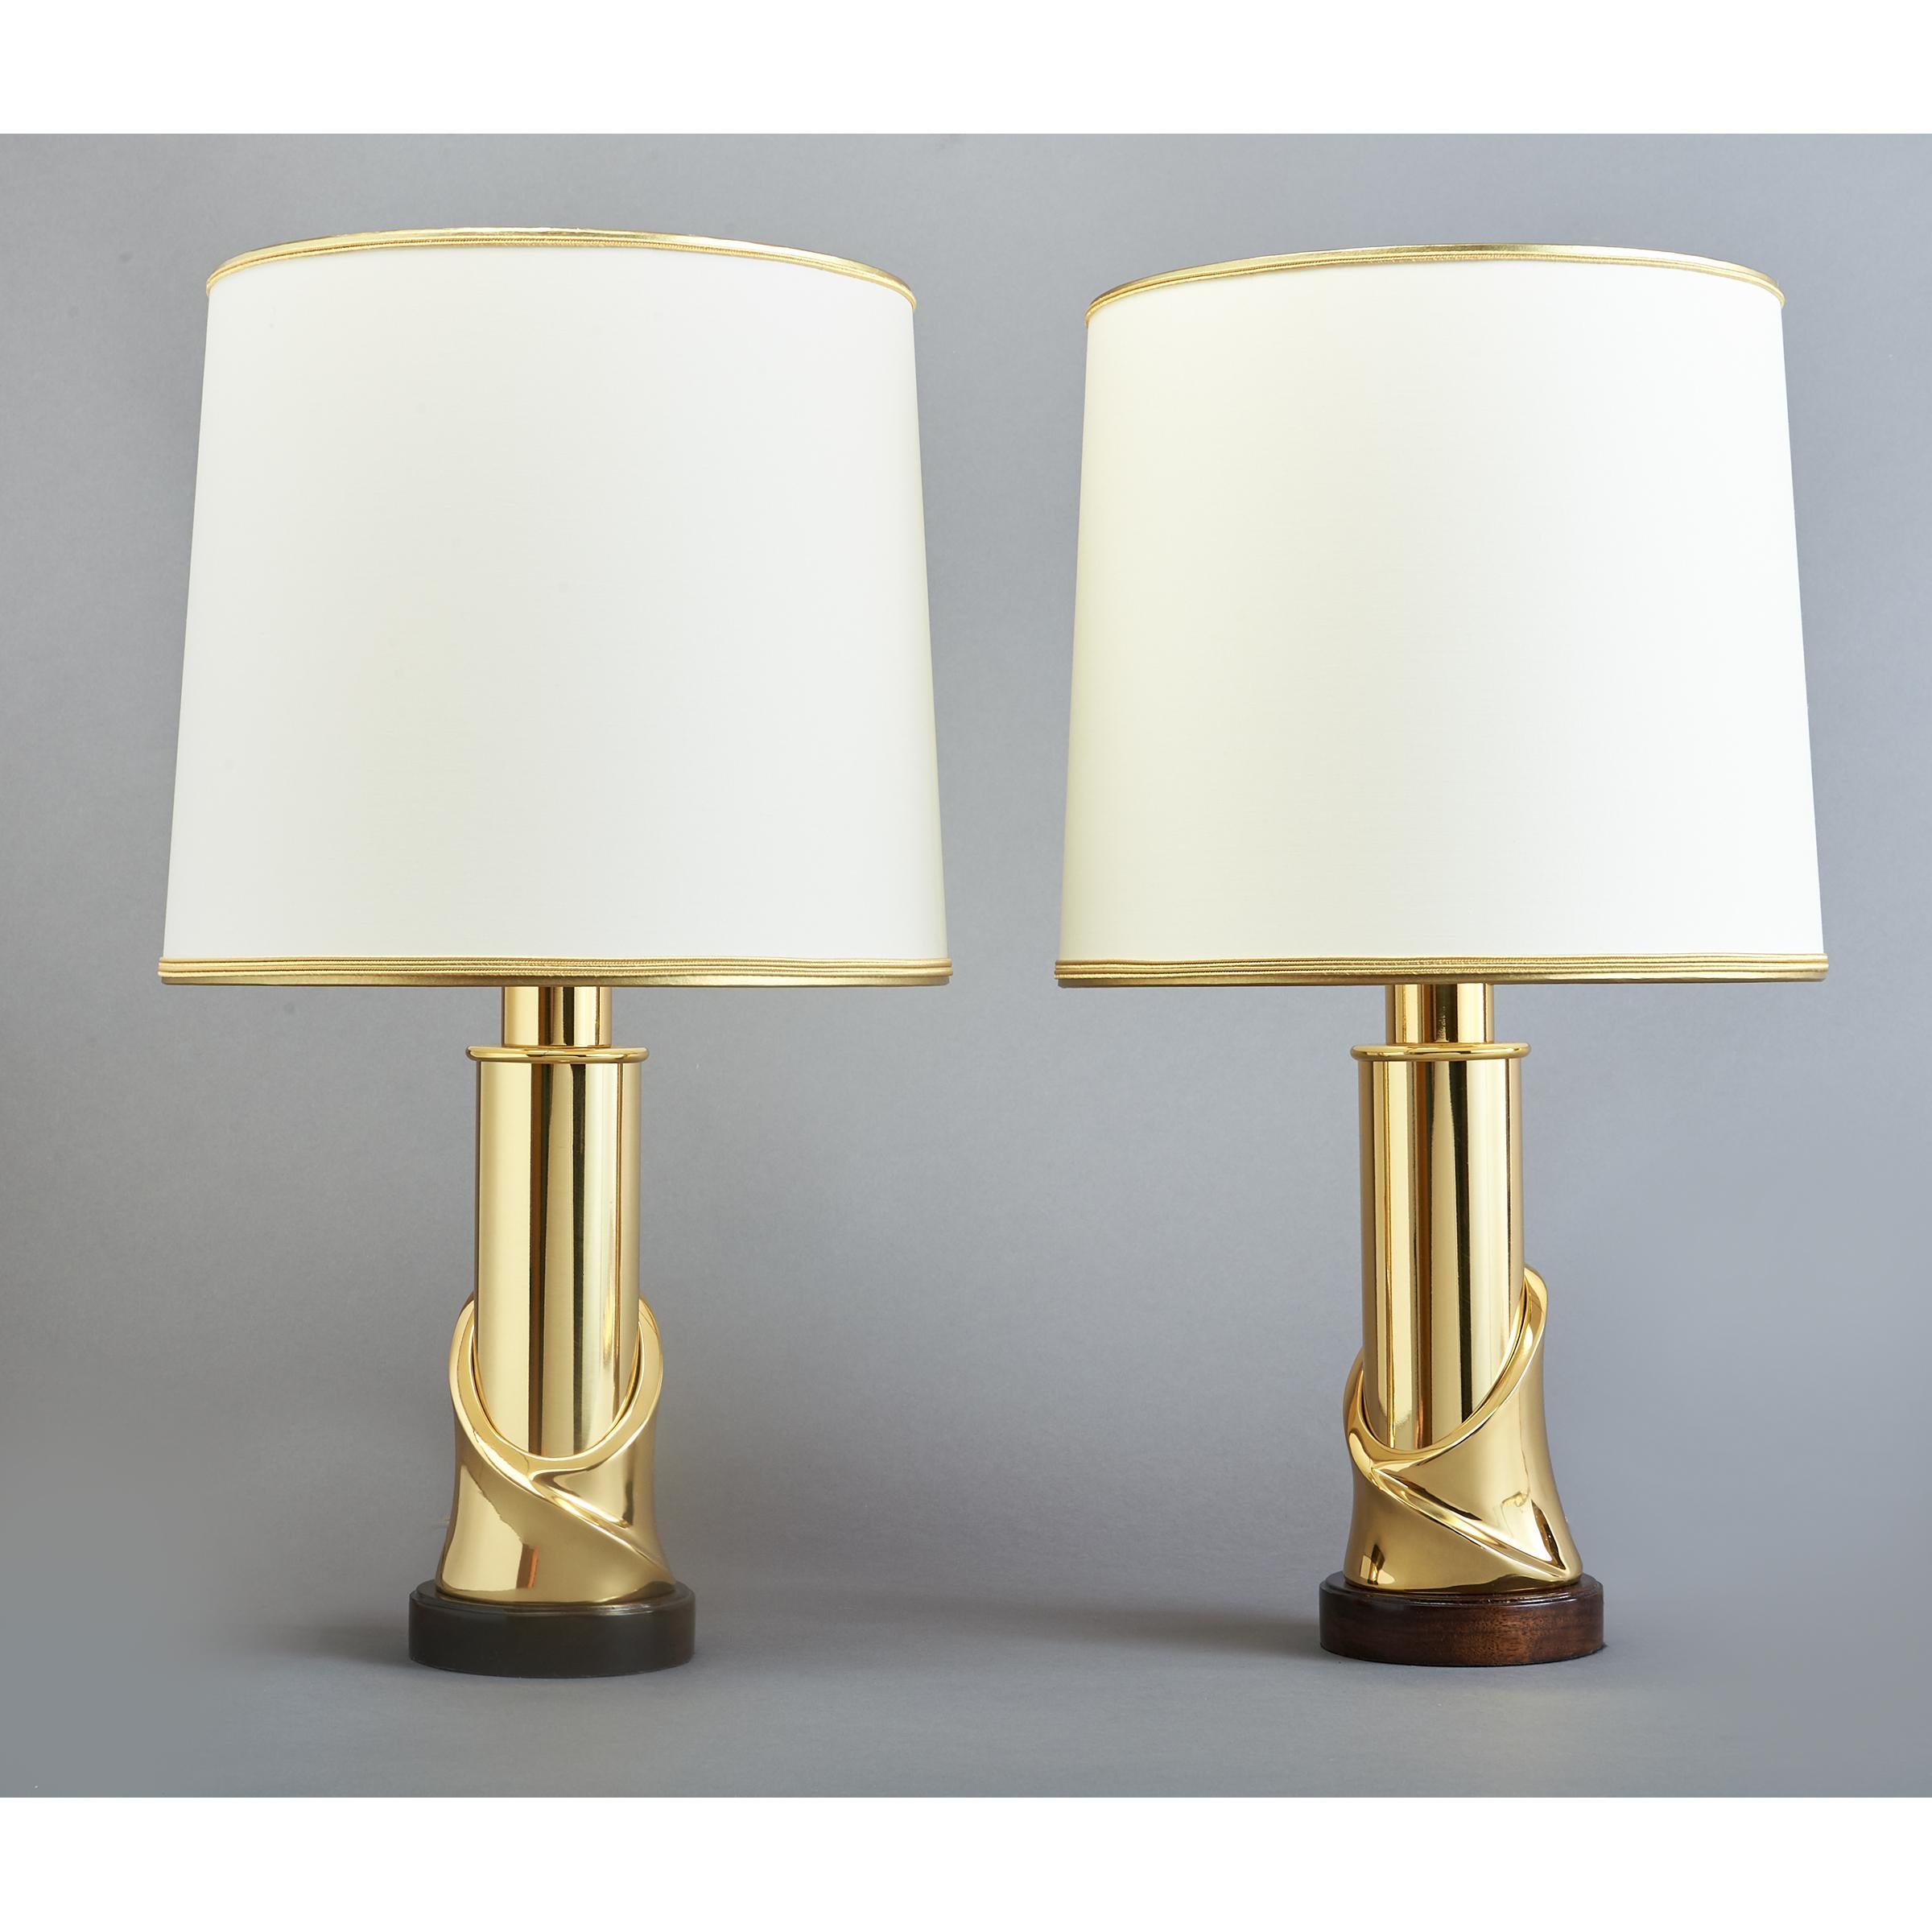 Italy, 1970's
Pair of polished brass table lamps with sculptural climbing spiral motif shaft on polished wood base.
Measures: diameter 11 x 20 height
Rewired for use in the US with one standard base bulb
New round fabric shade, with elegant trim.